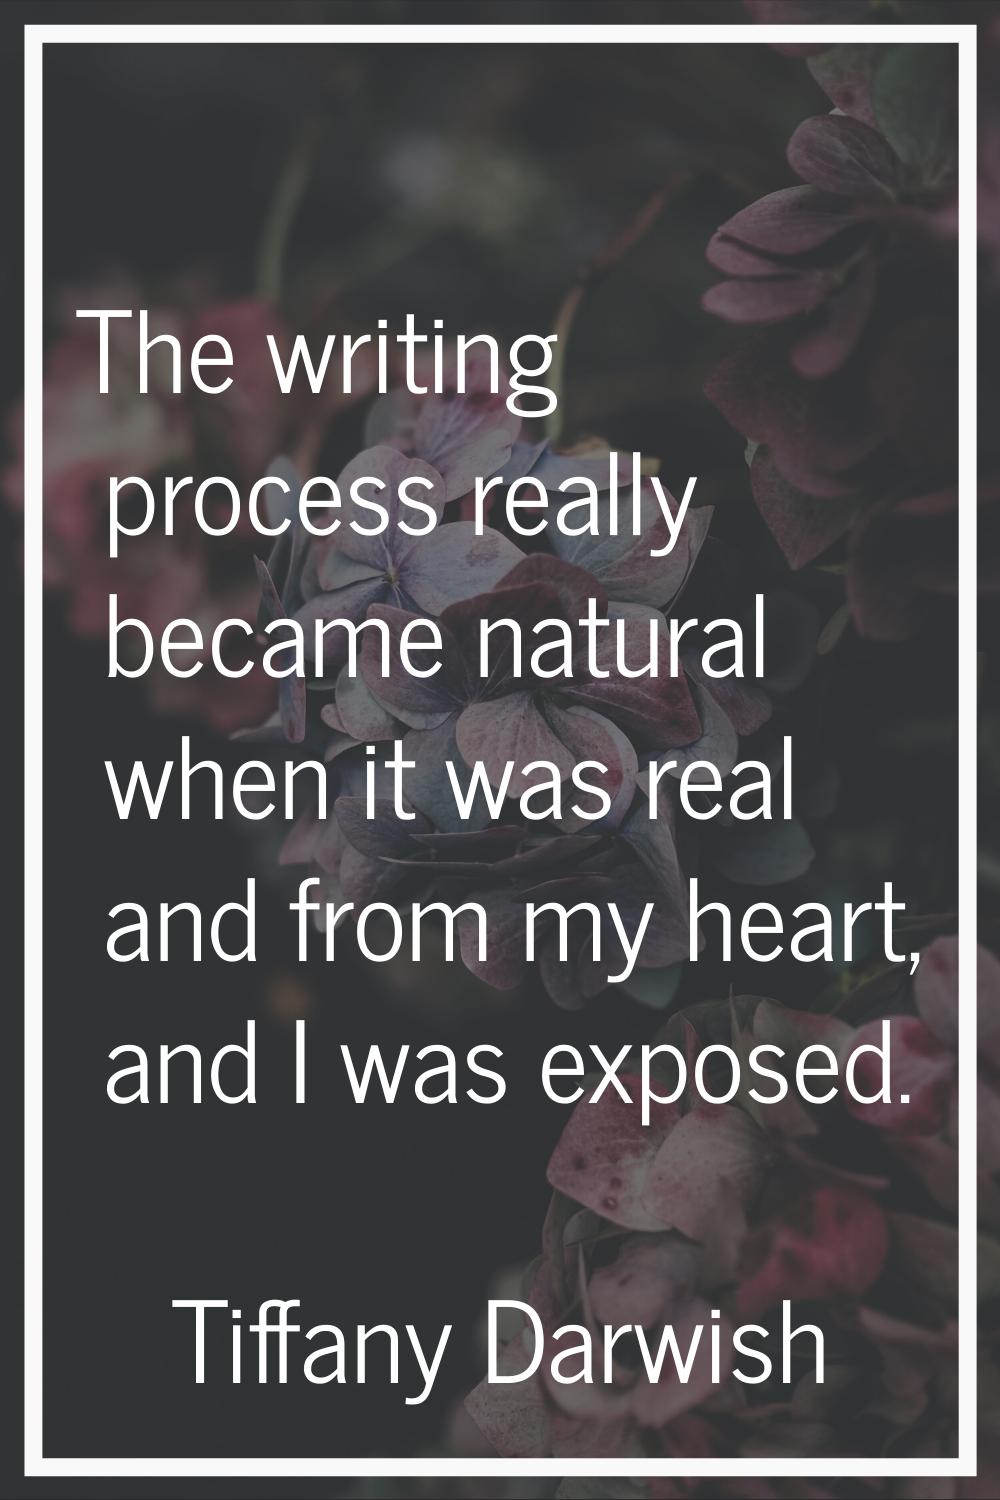 The writing process really became natural when it was real and from my heart, and I was exposed.